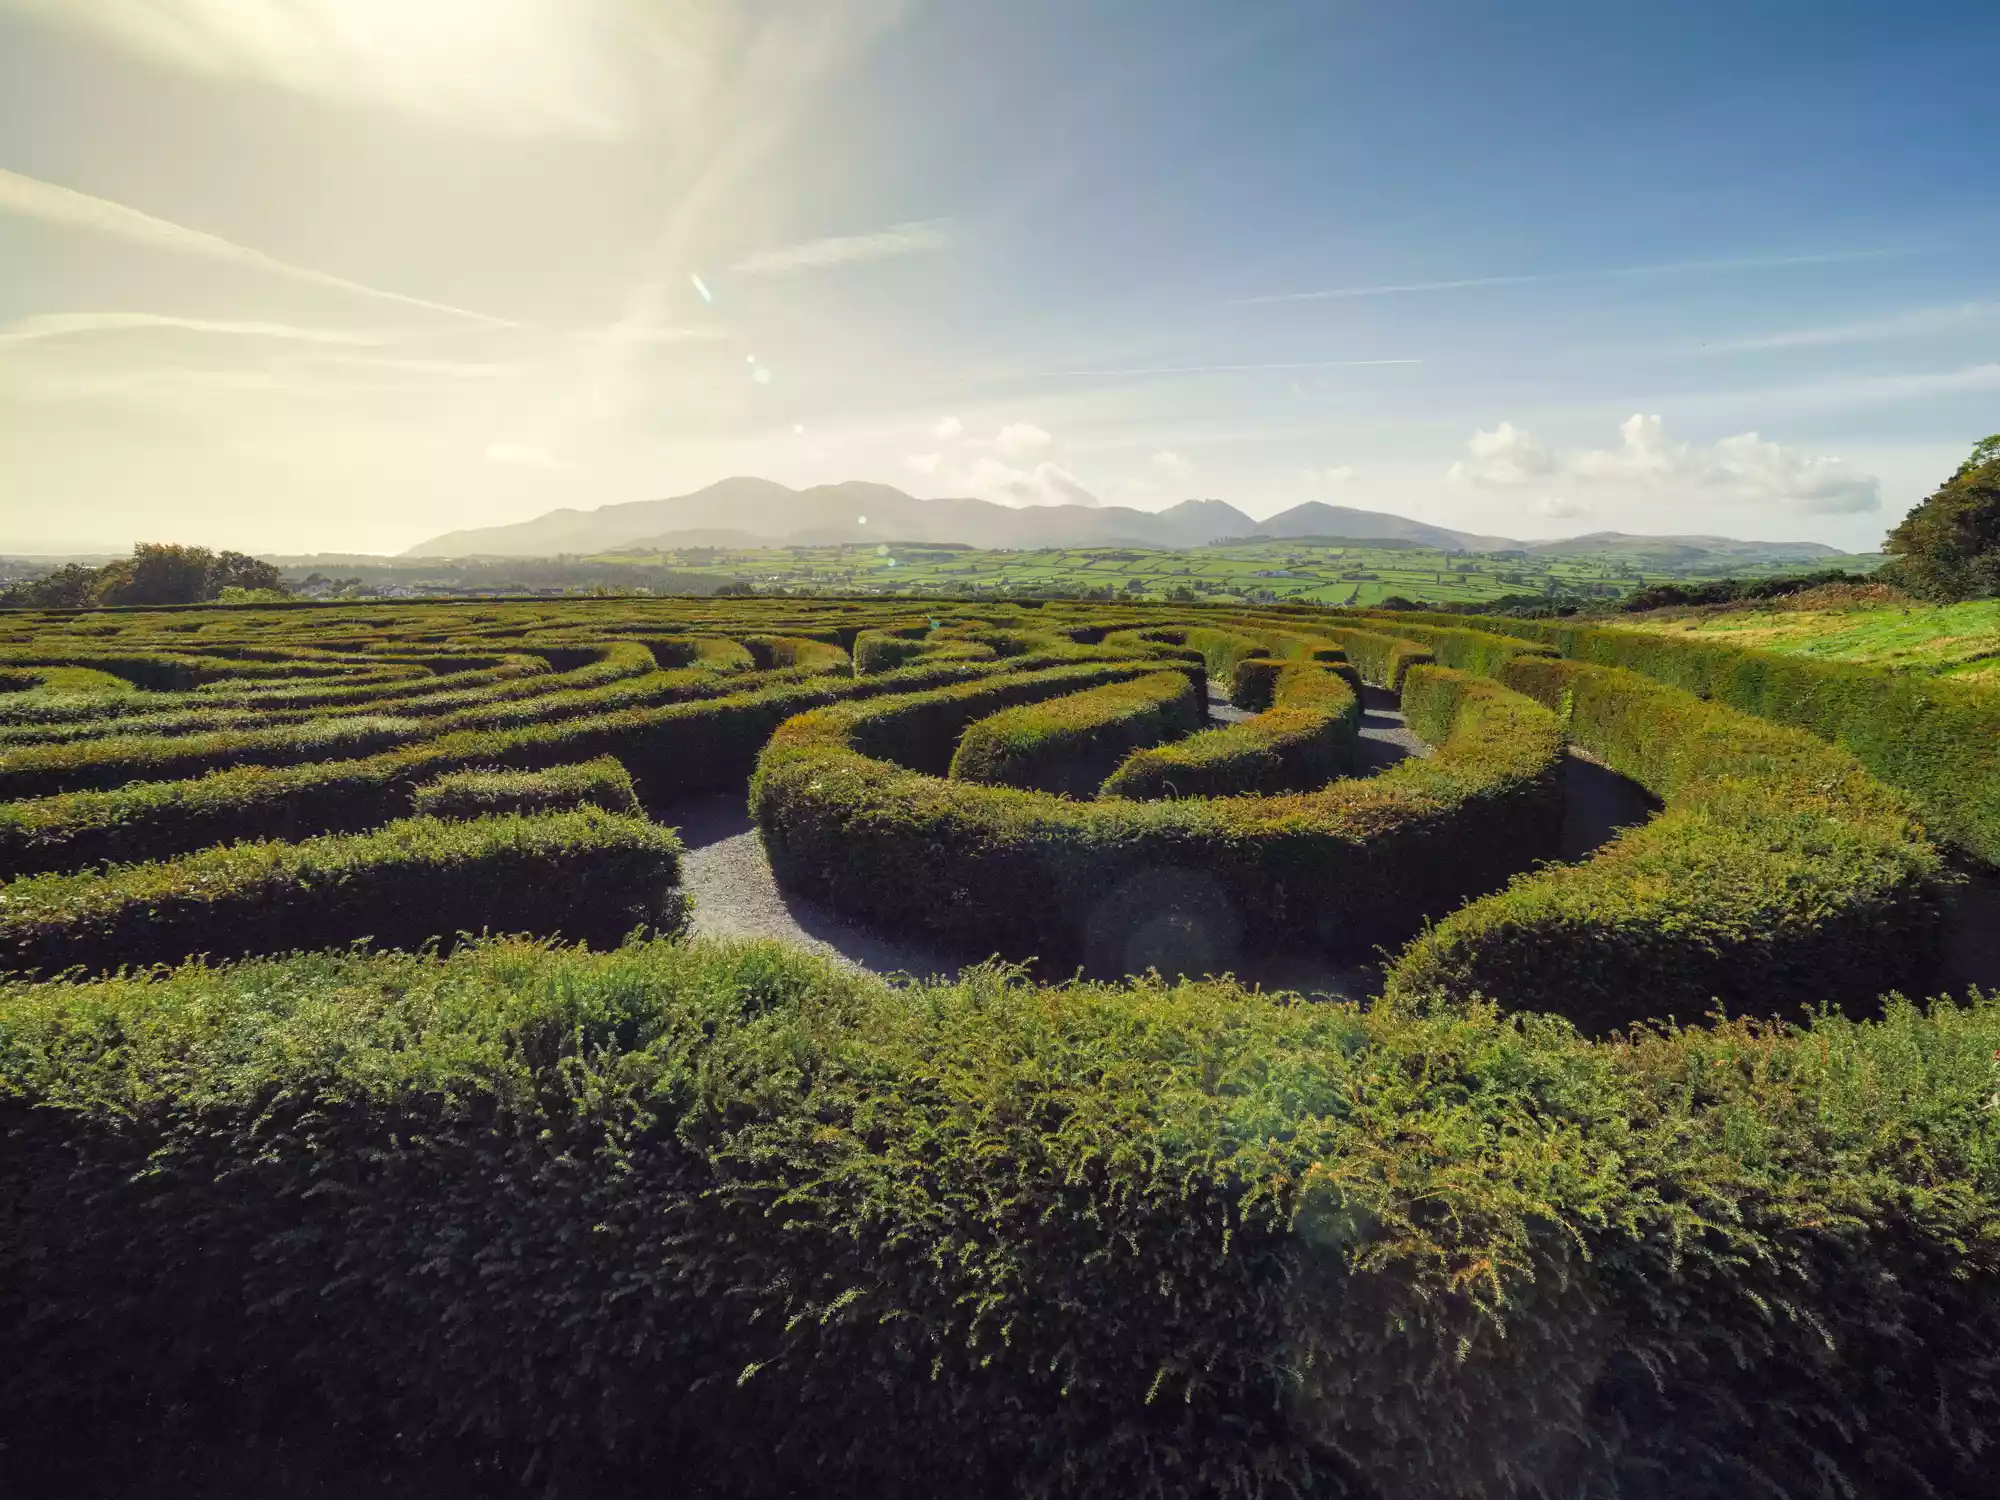 A hedge maze in front of a distant mountain range